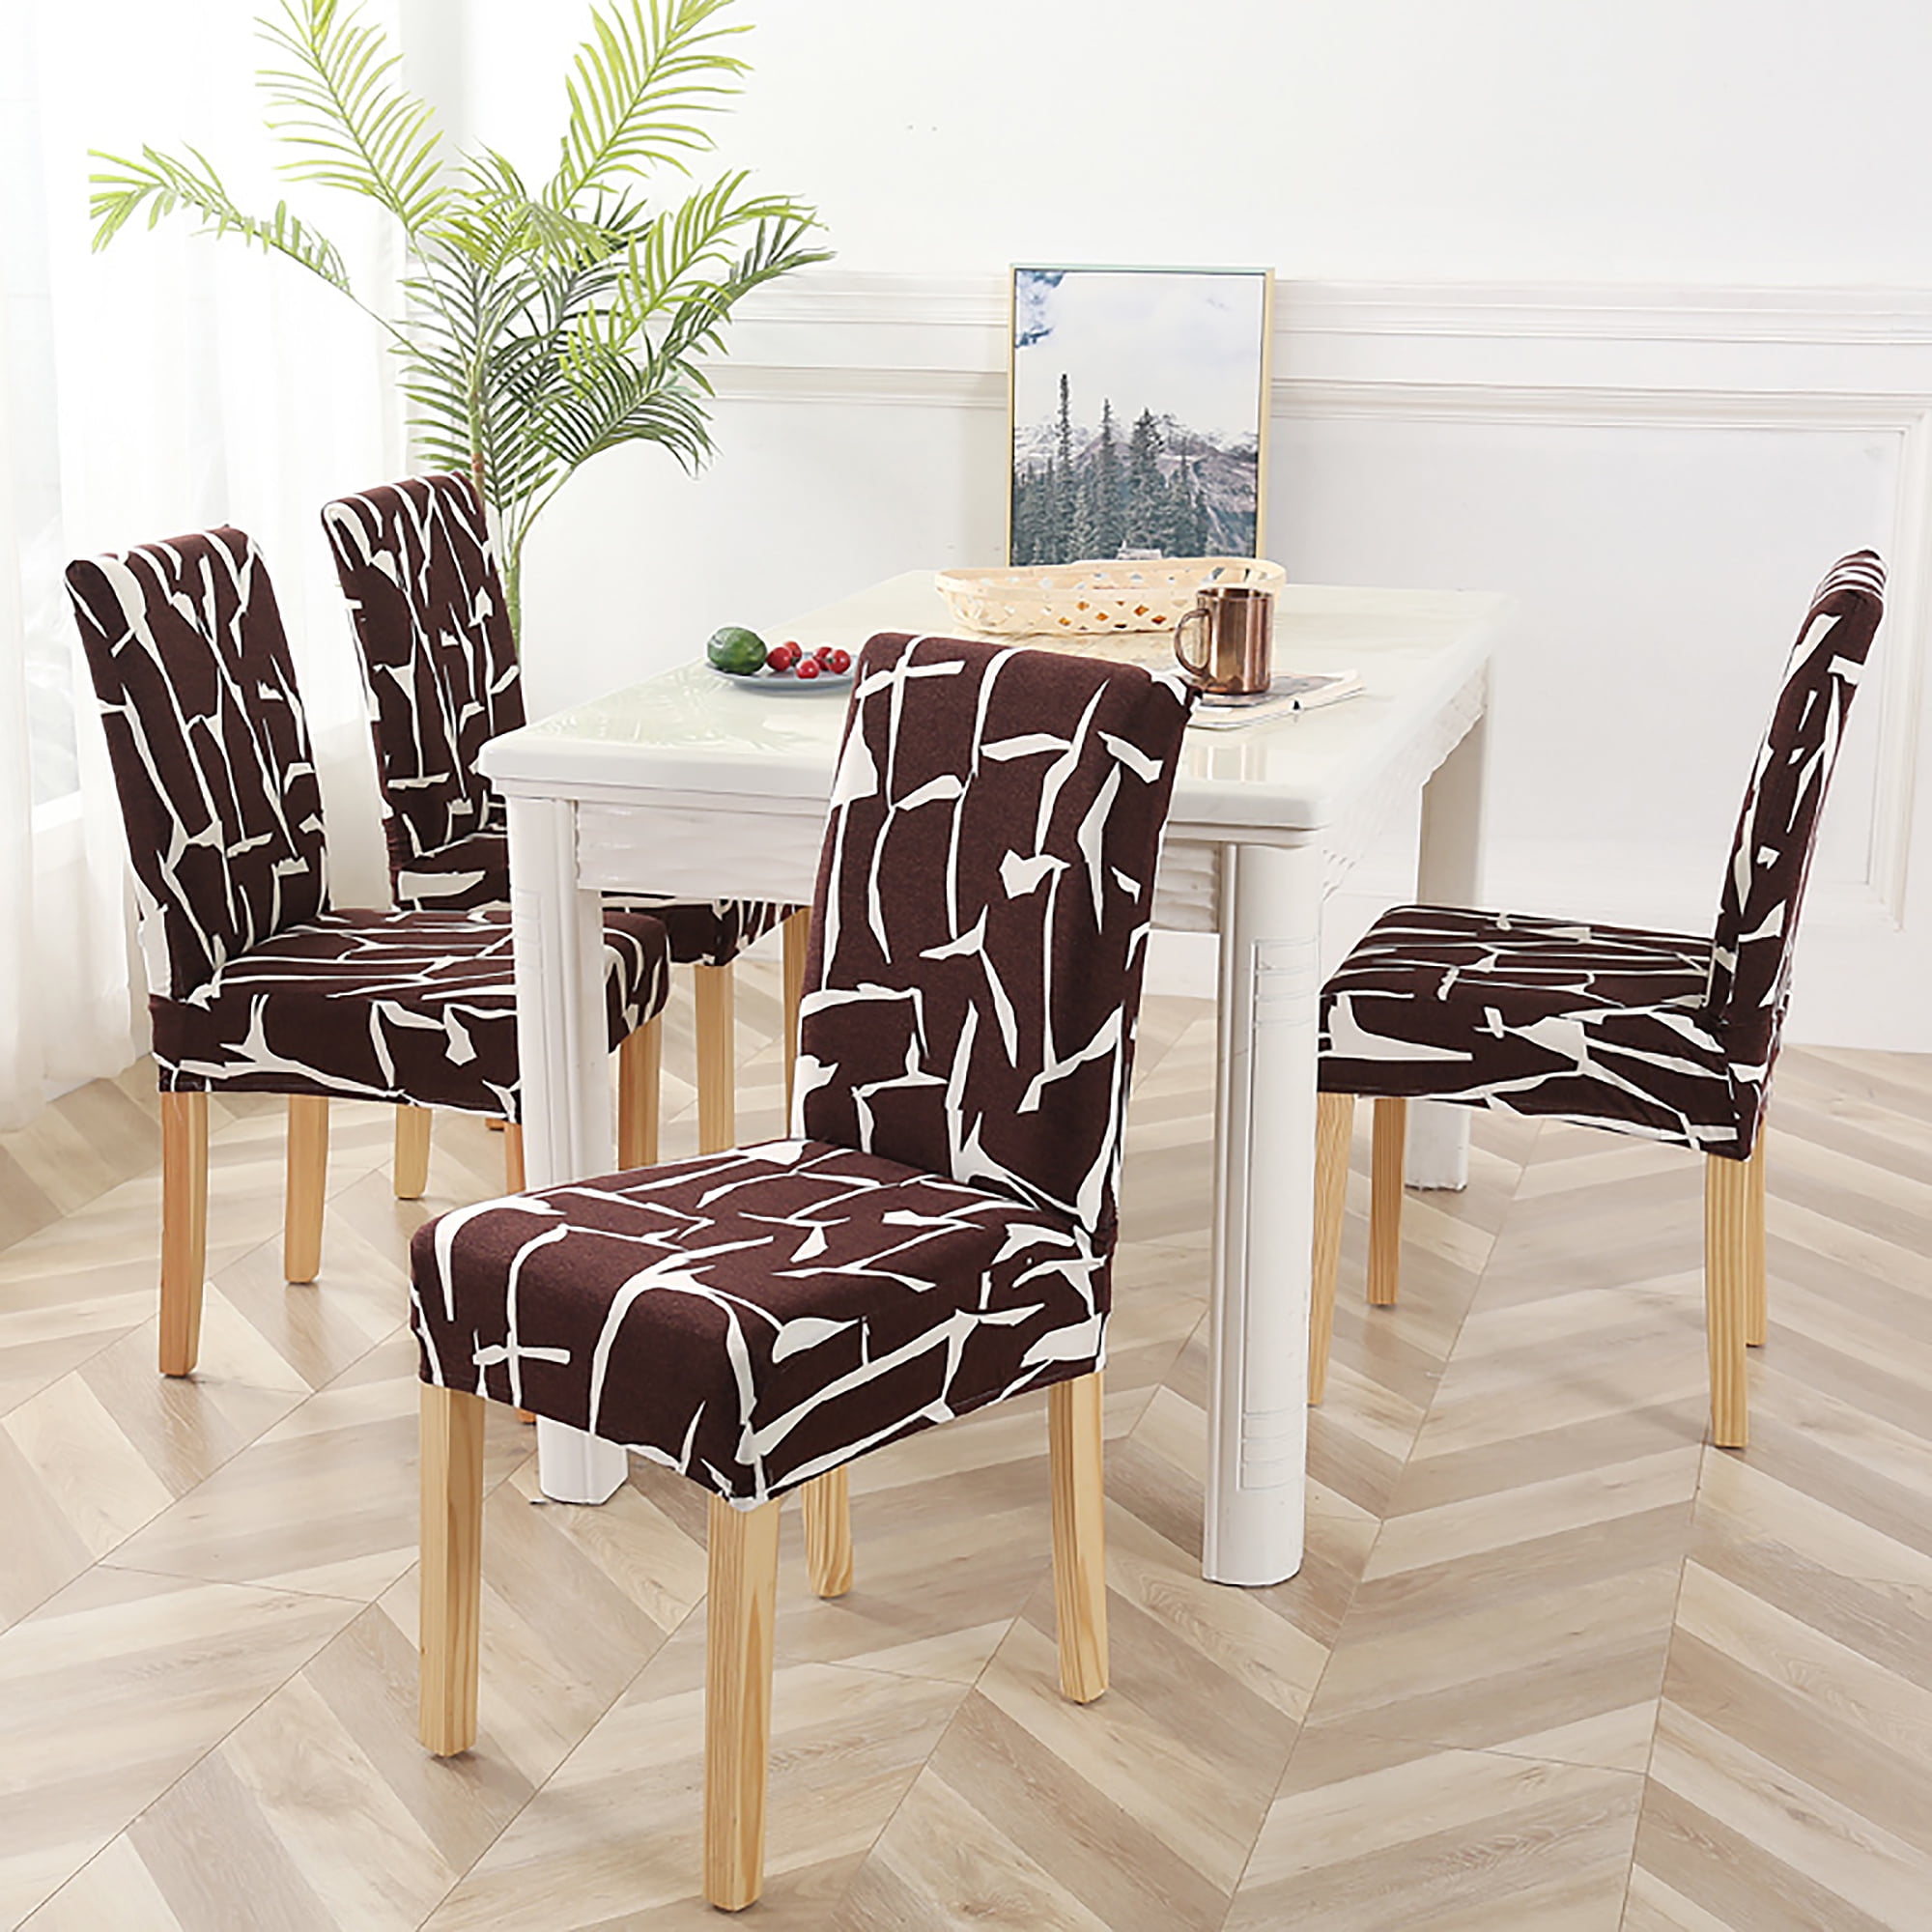 Details about   Dining Stretch Chair Seat Cover for Home Decor Dining Banquet Chair 1/2/4 pcs US 